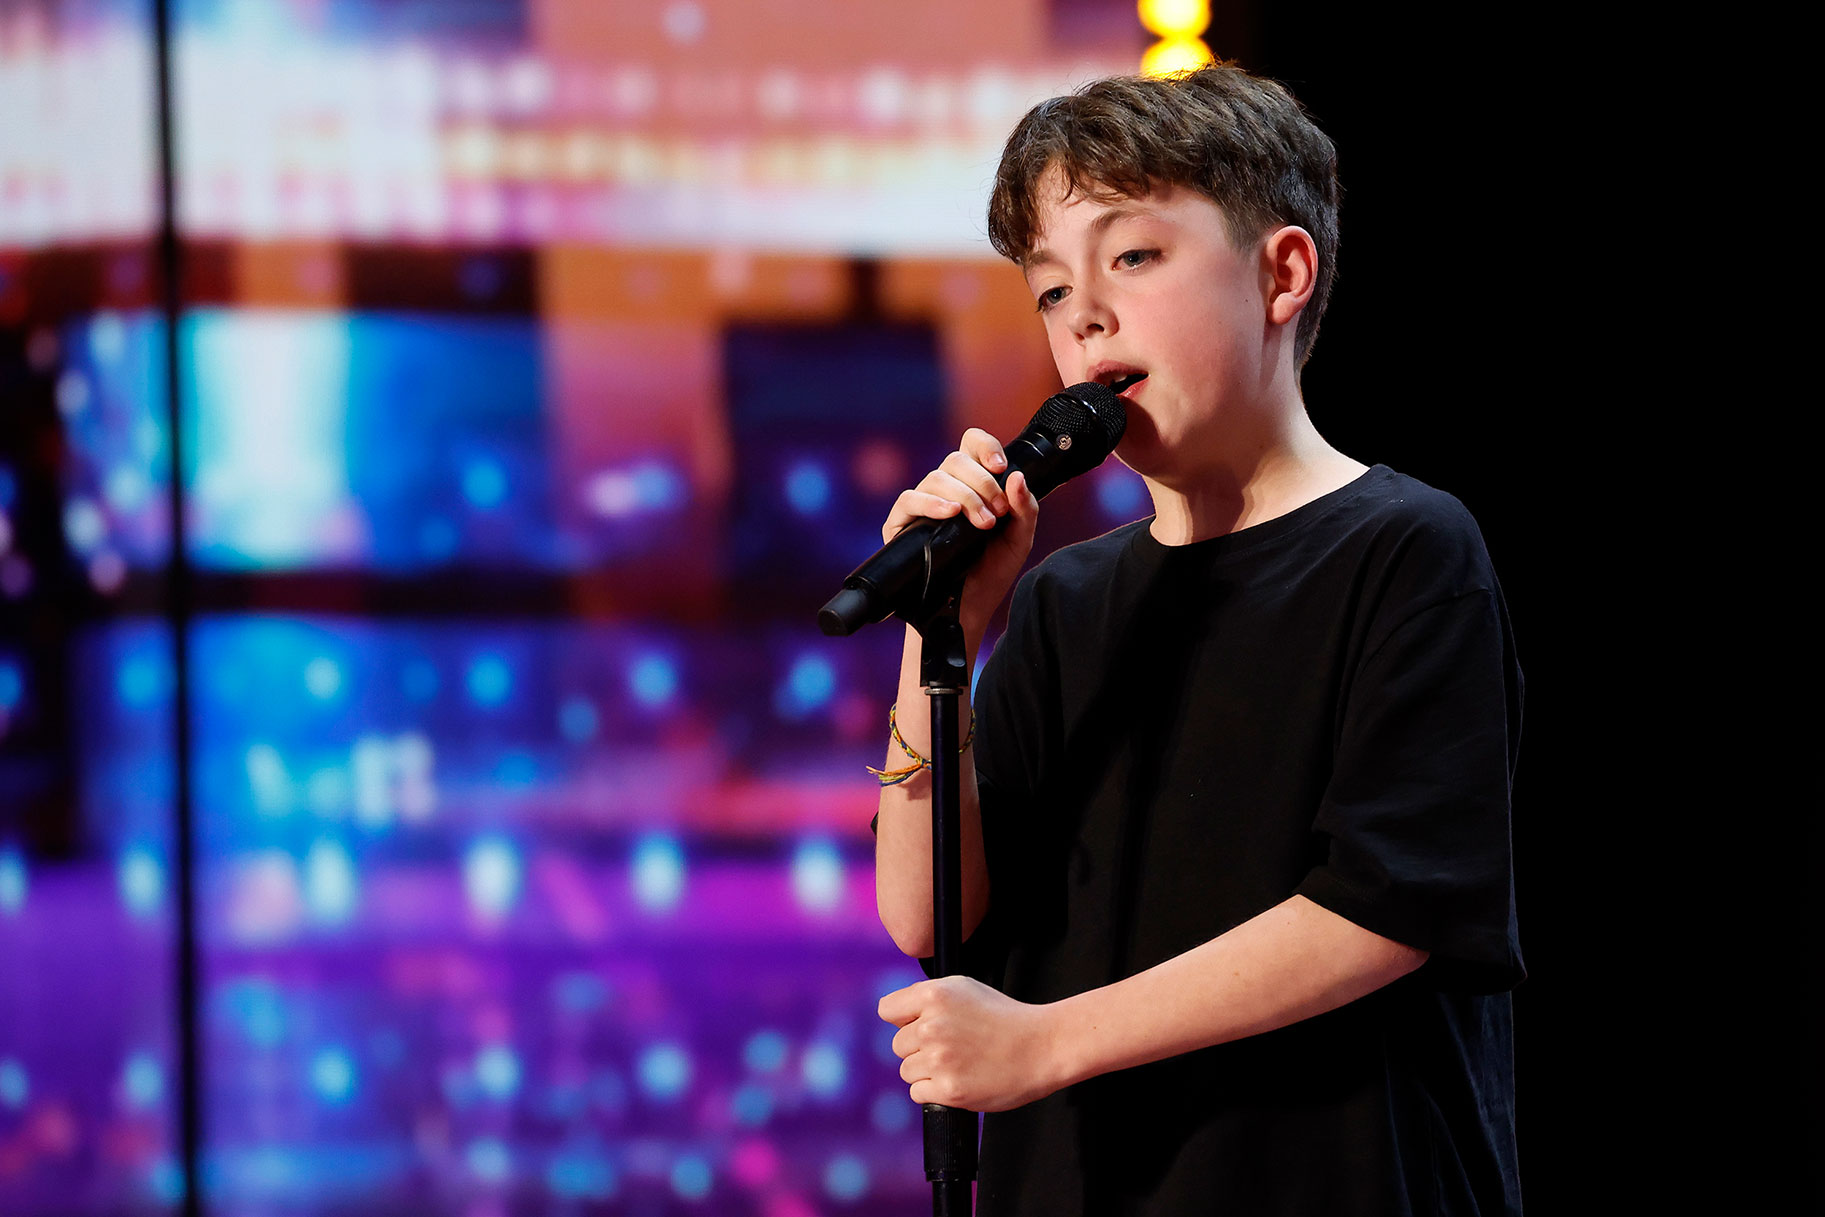 The Boy Who Sang Acapella On Agt